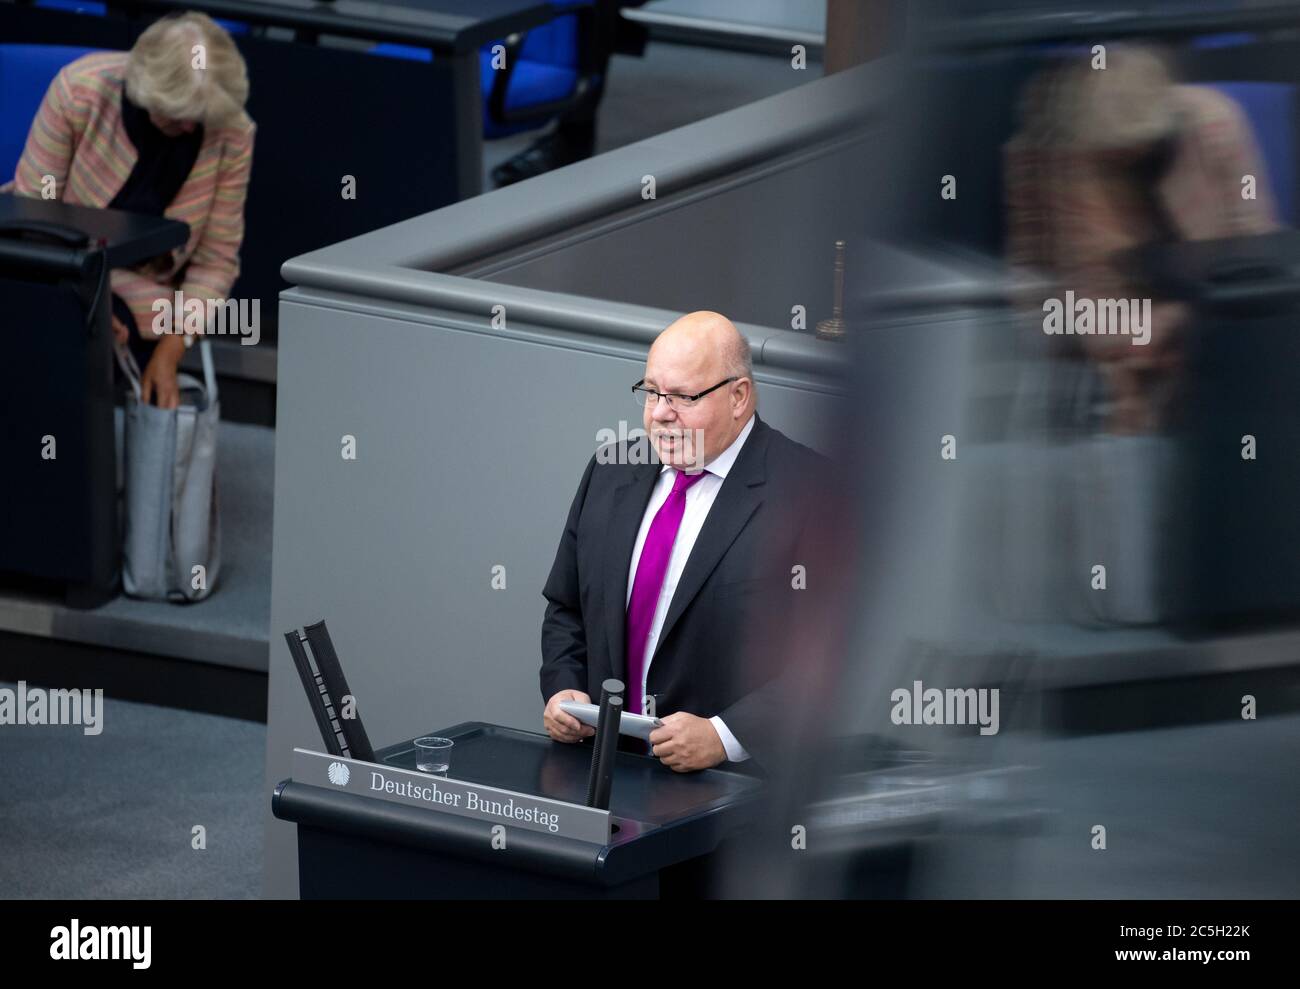 Berlin, Germany. 03rd July, 2020. Peter Altmaier (CDU), Federal Minister of Economics and Energy, speaks in the plenary session of the German Bundestag. The main topics of the 171st session of the 19th legislative period will be the adoption of the Coal Exit Act, a topical hour on the excesses of violence in Stuttgart, as well as debates on electoral law reform, the protection of electronic patient data, the welfare of farm animals and the German chairmanship of the UN Security Council. Credit: Bernd von Jutrczenka/dpa/Alamy Live News Stock Photo